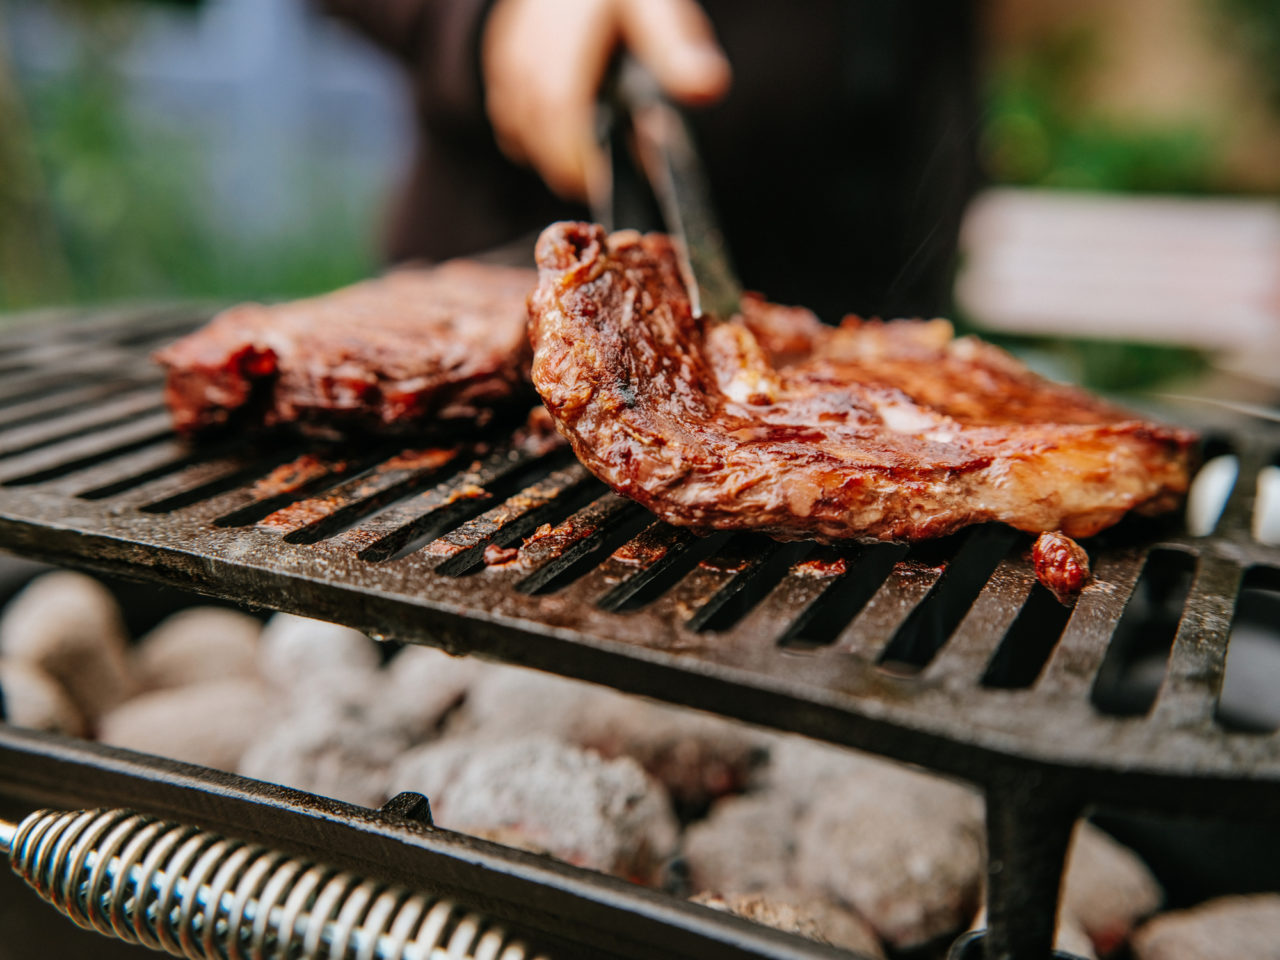 Are Barbecues Bad For Your Health?